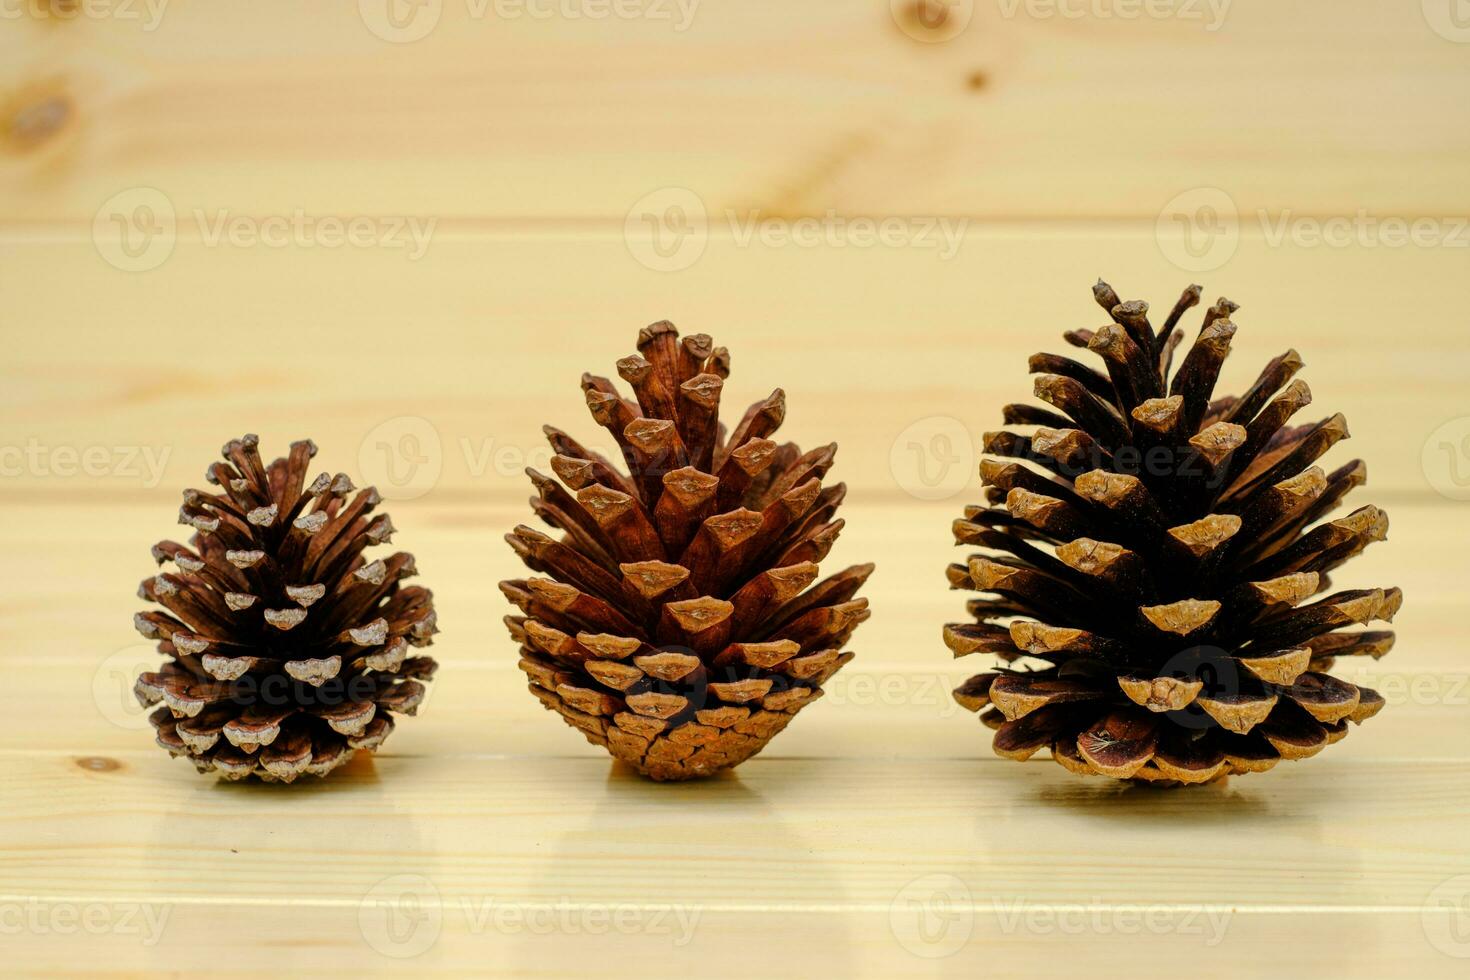 Dry pine cone on the wood table photo